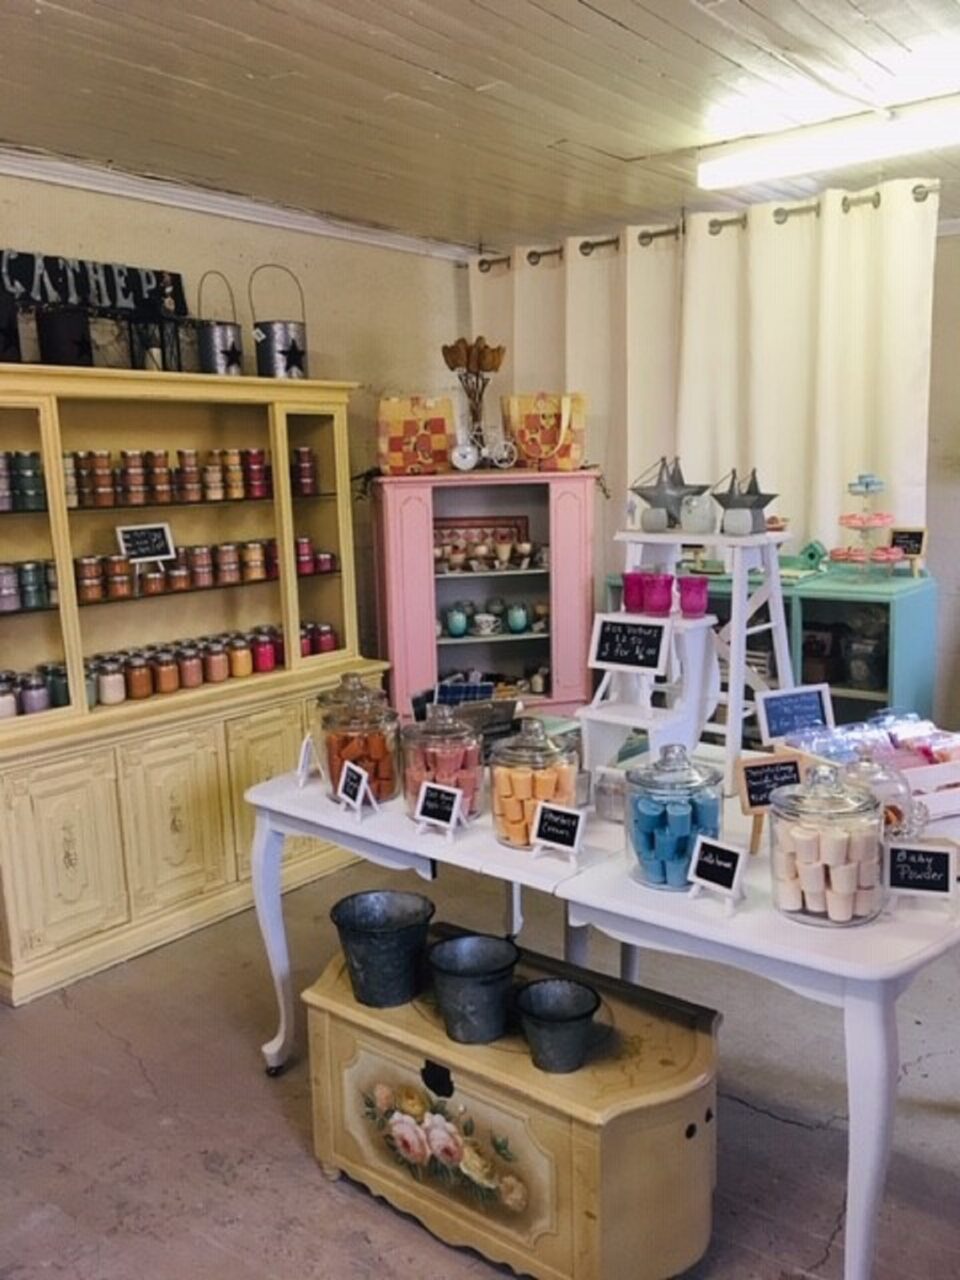 Shelves and tables in a boutique displaying candles and other things for sale